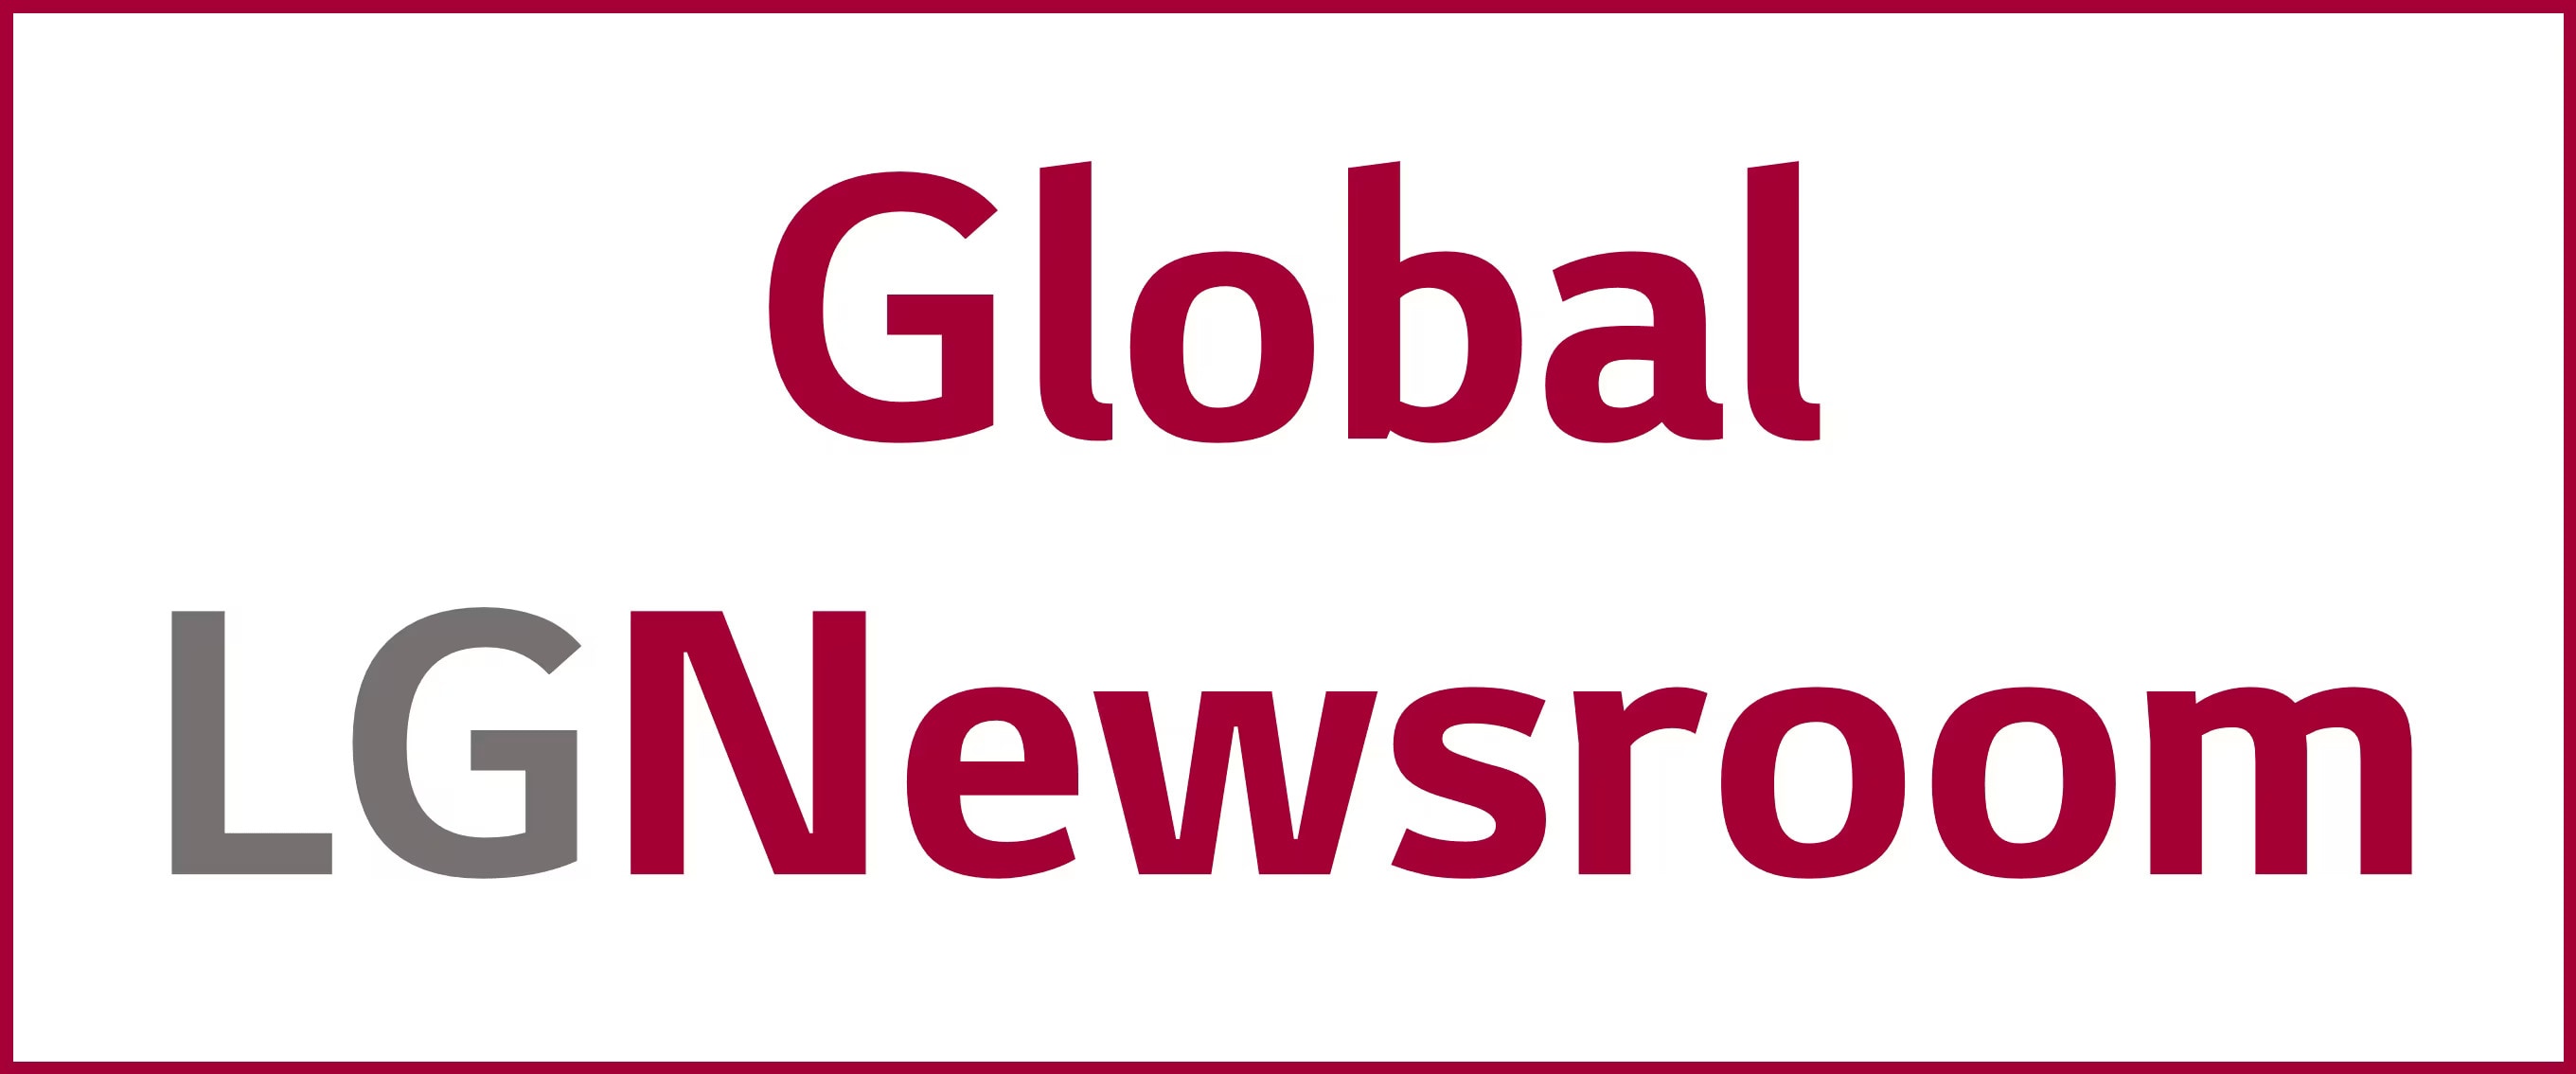 <strong>Visit the Global LGNewsroom</strong>1